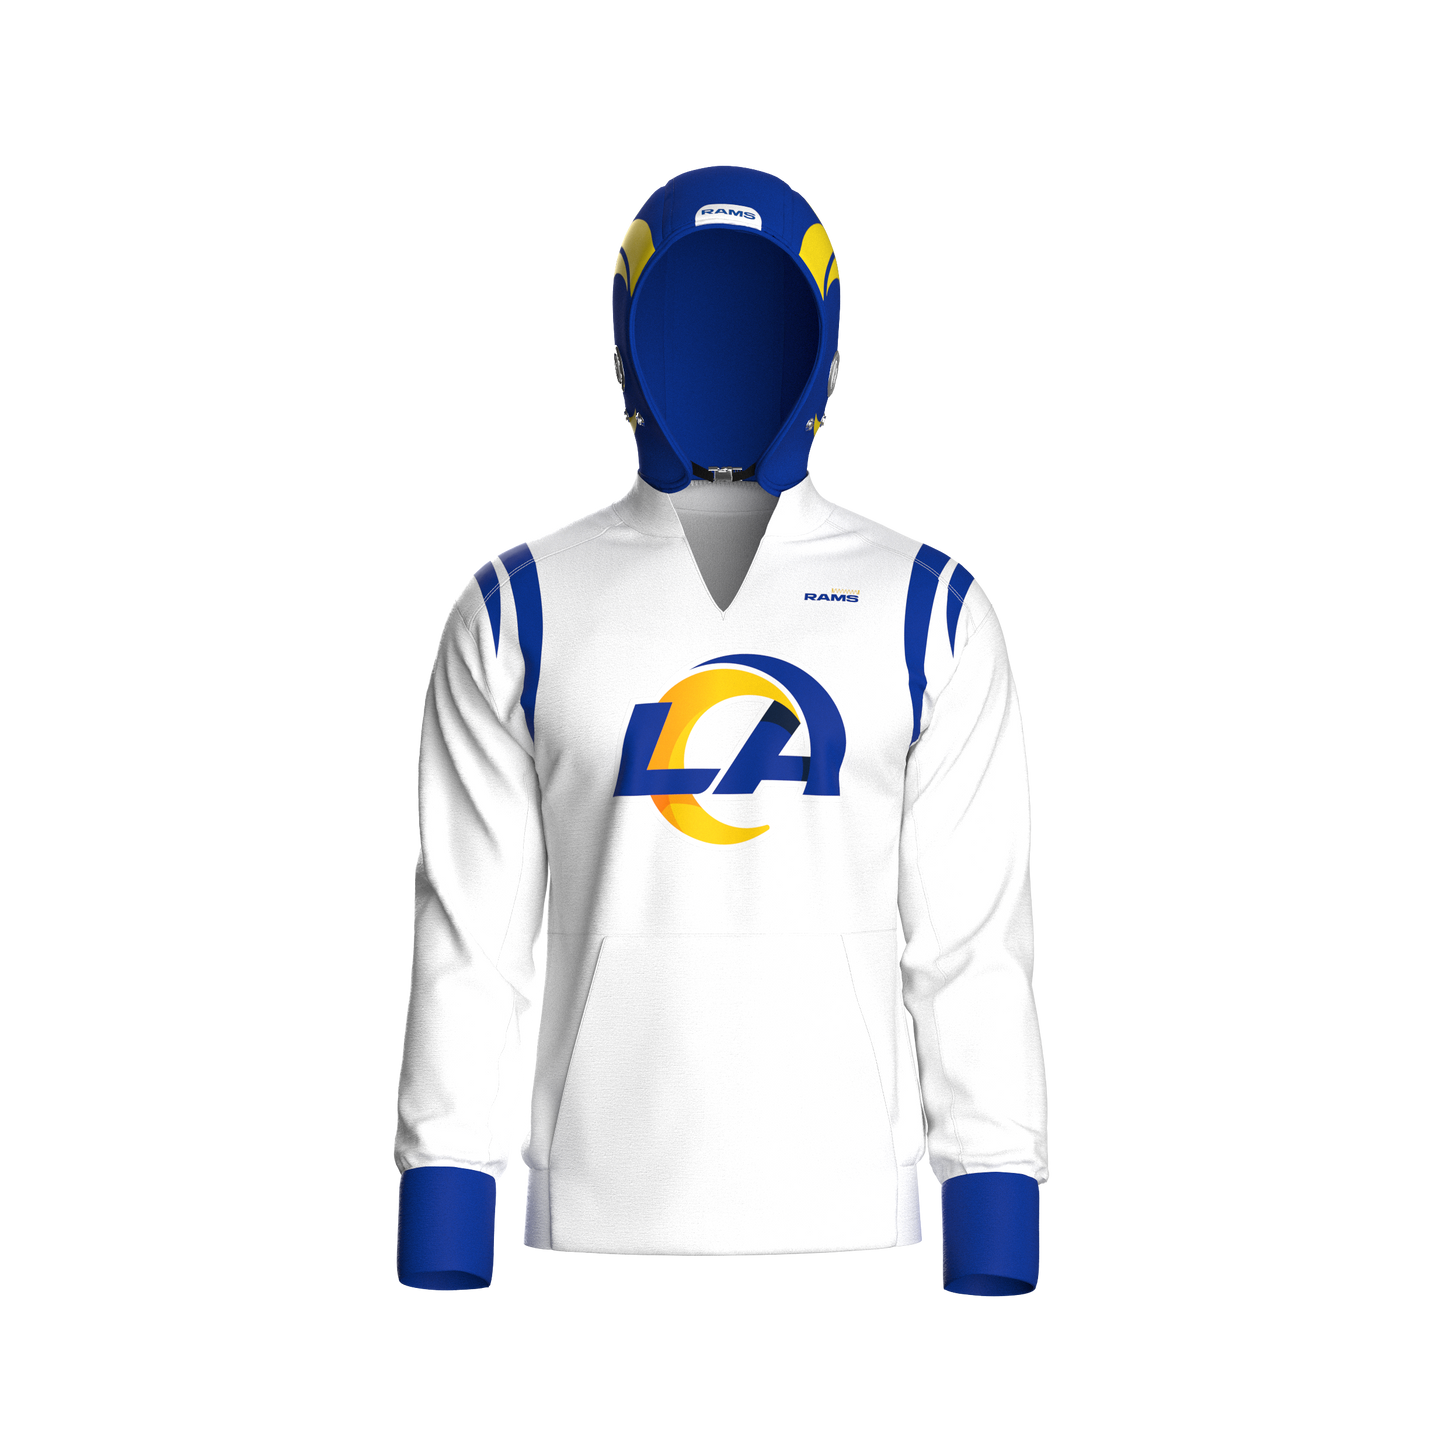 Los Angeles Rams Away Pullover (youth)